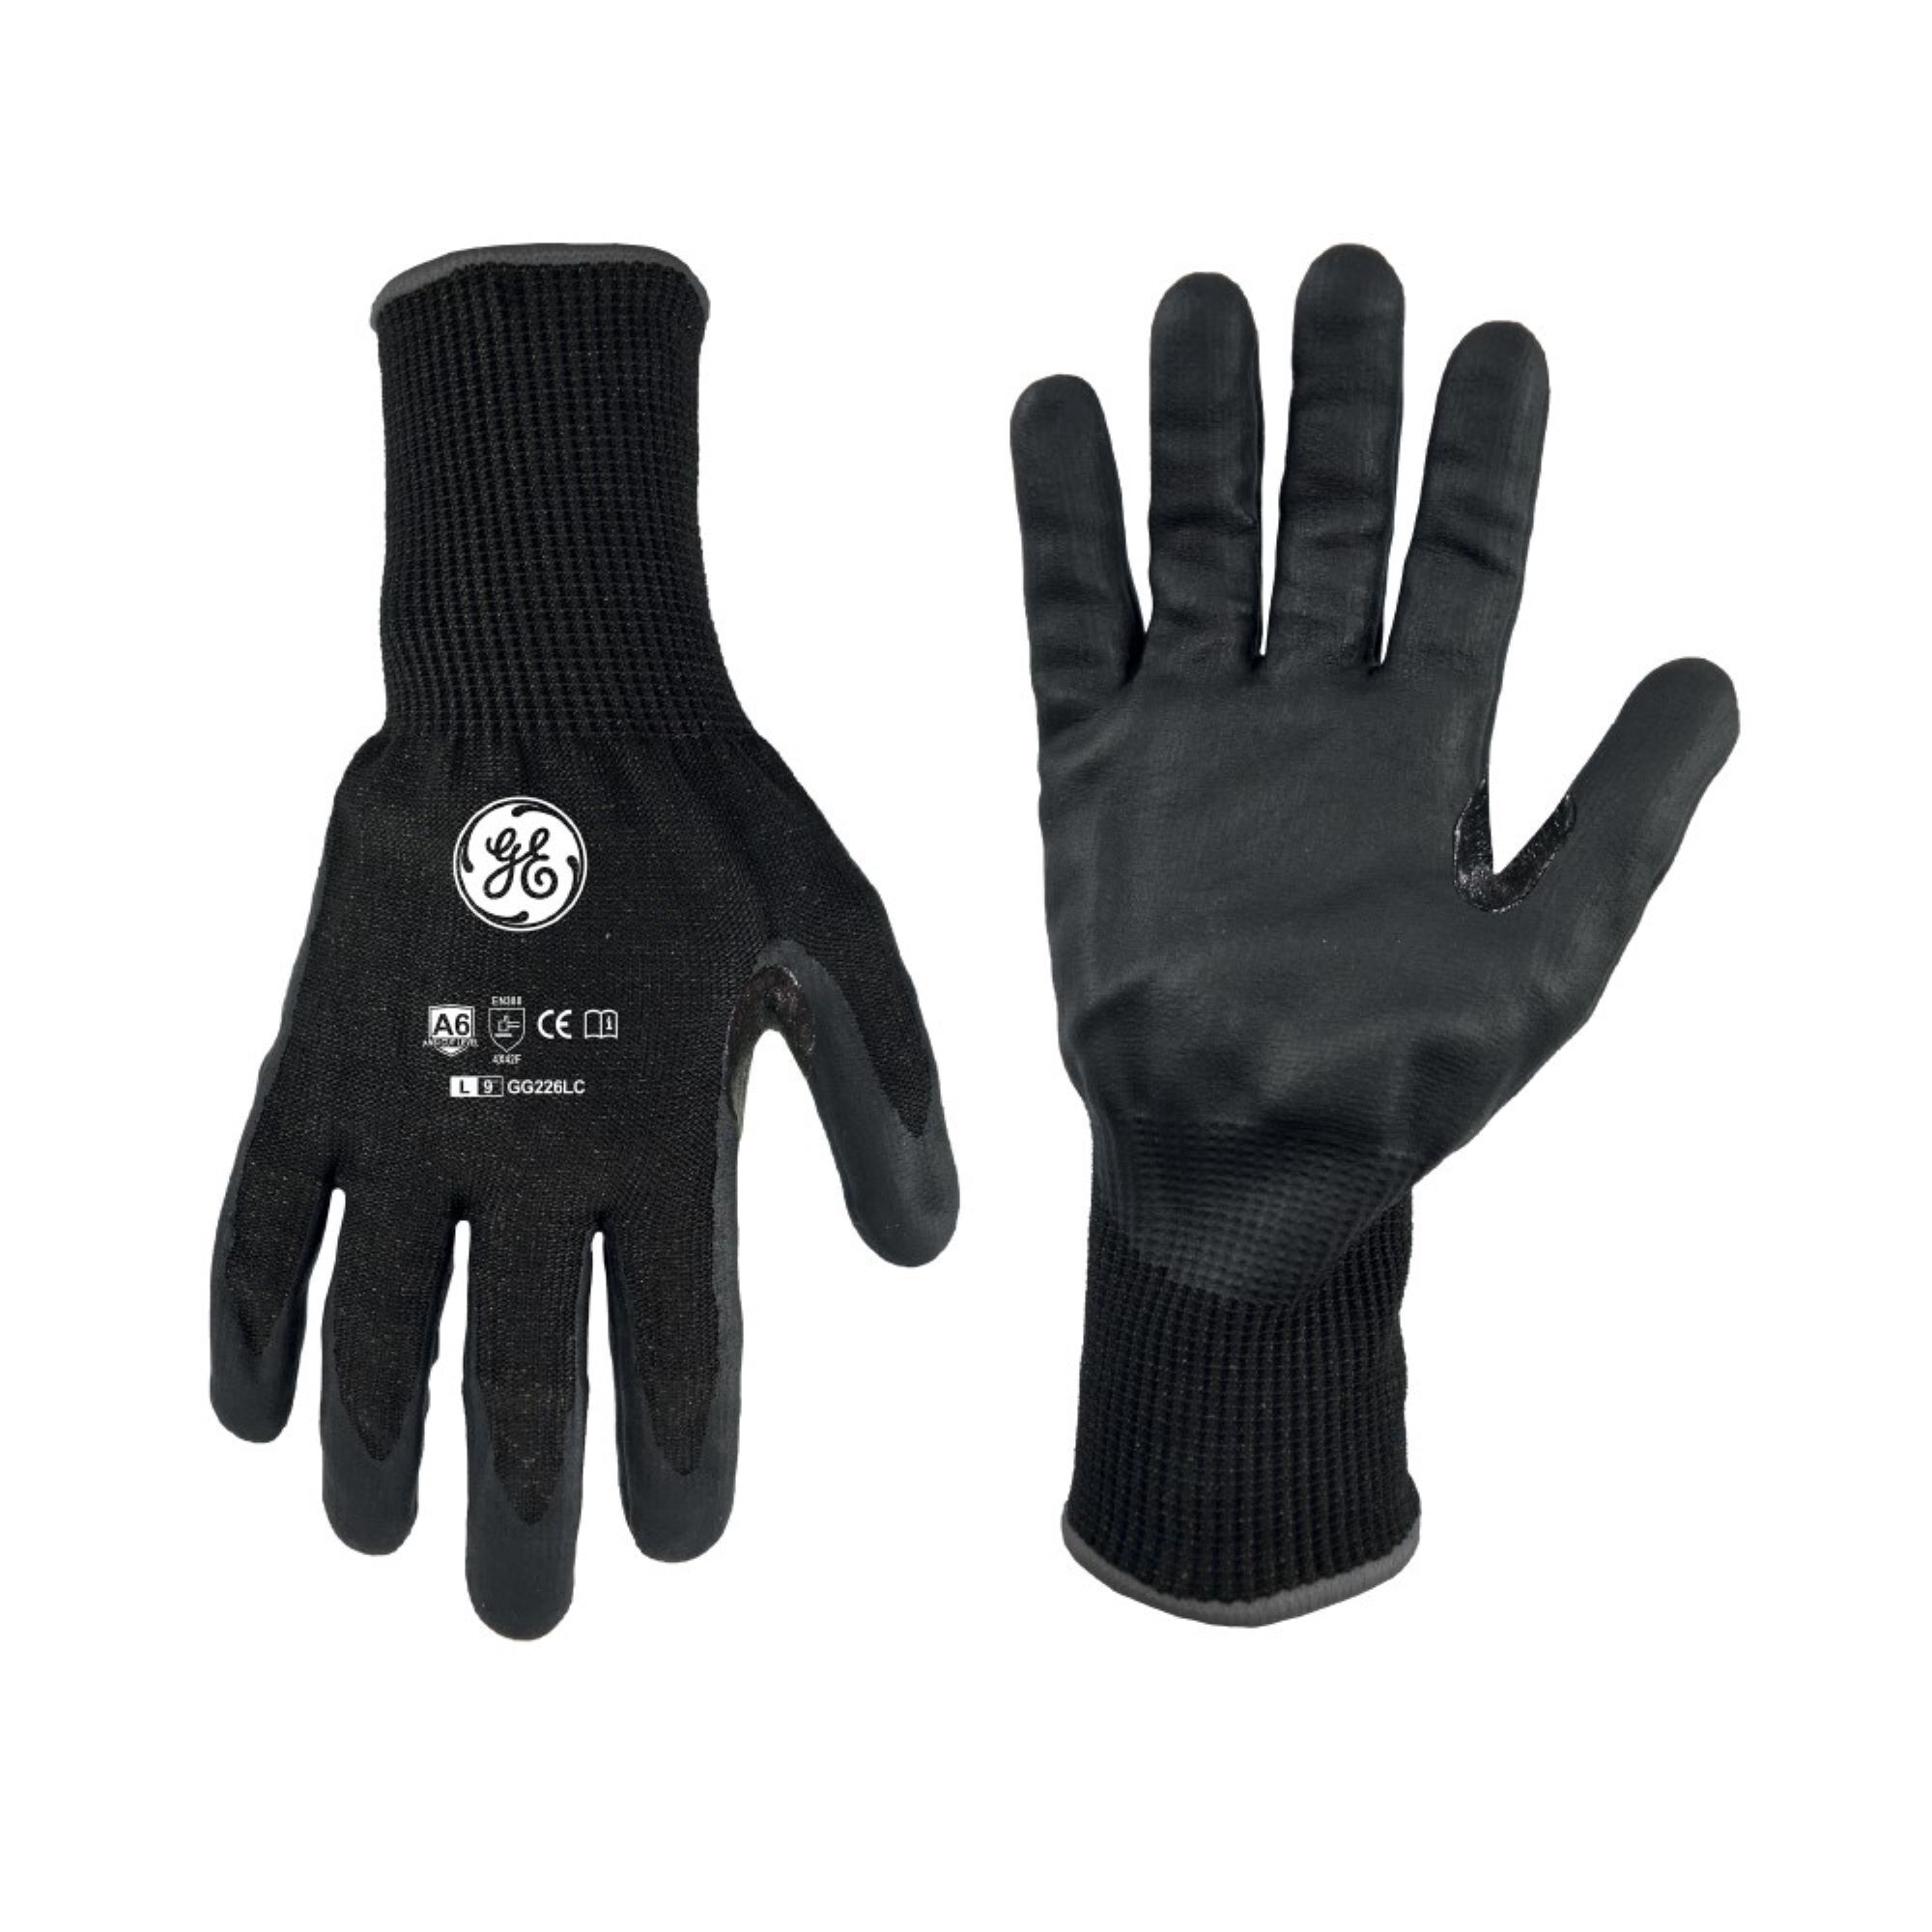 General Electric, L Foam Nitrile Black Dipped Gloves 12 pair, Size L, Included (qty.) 12, Model GG226L